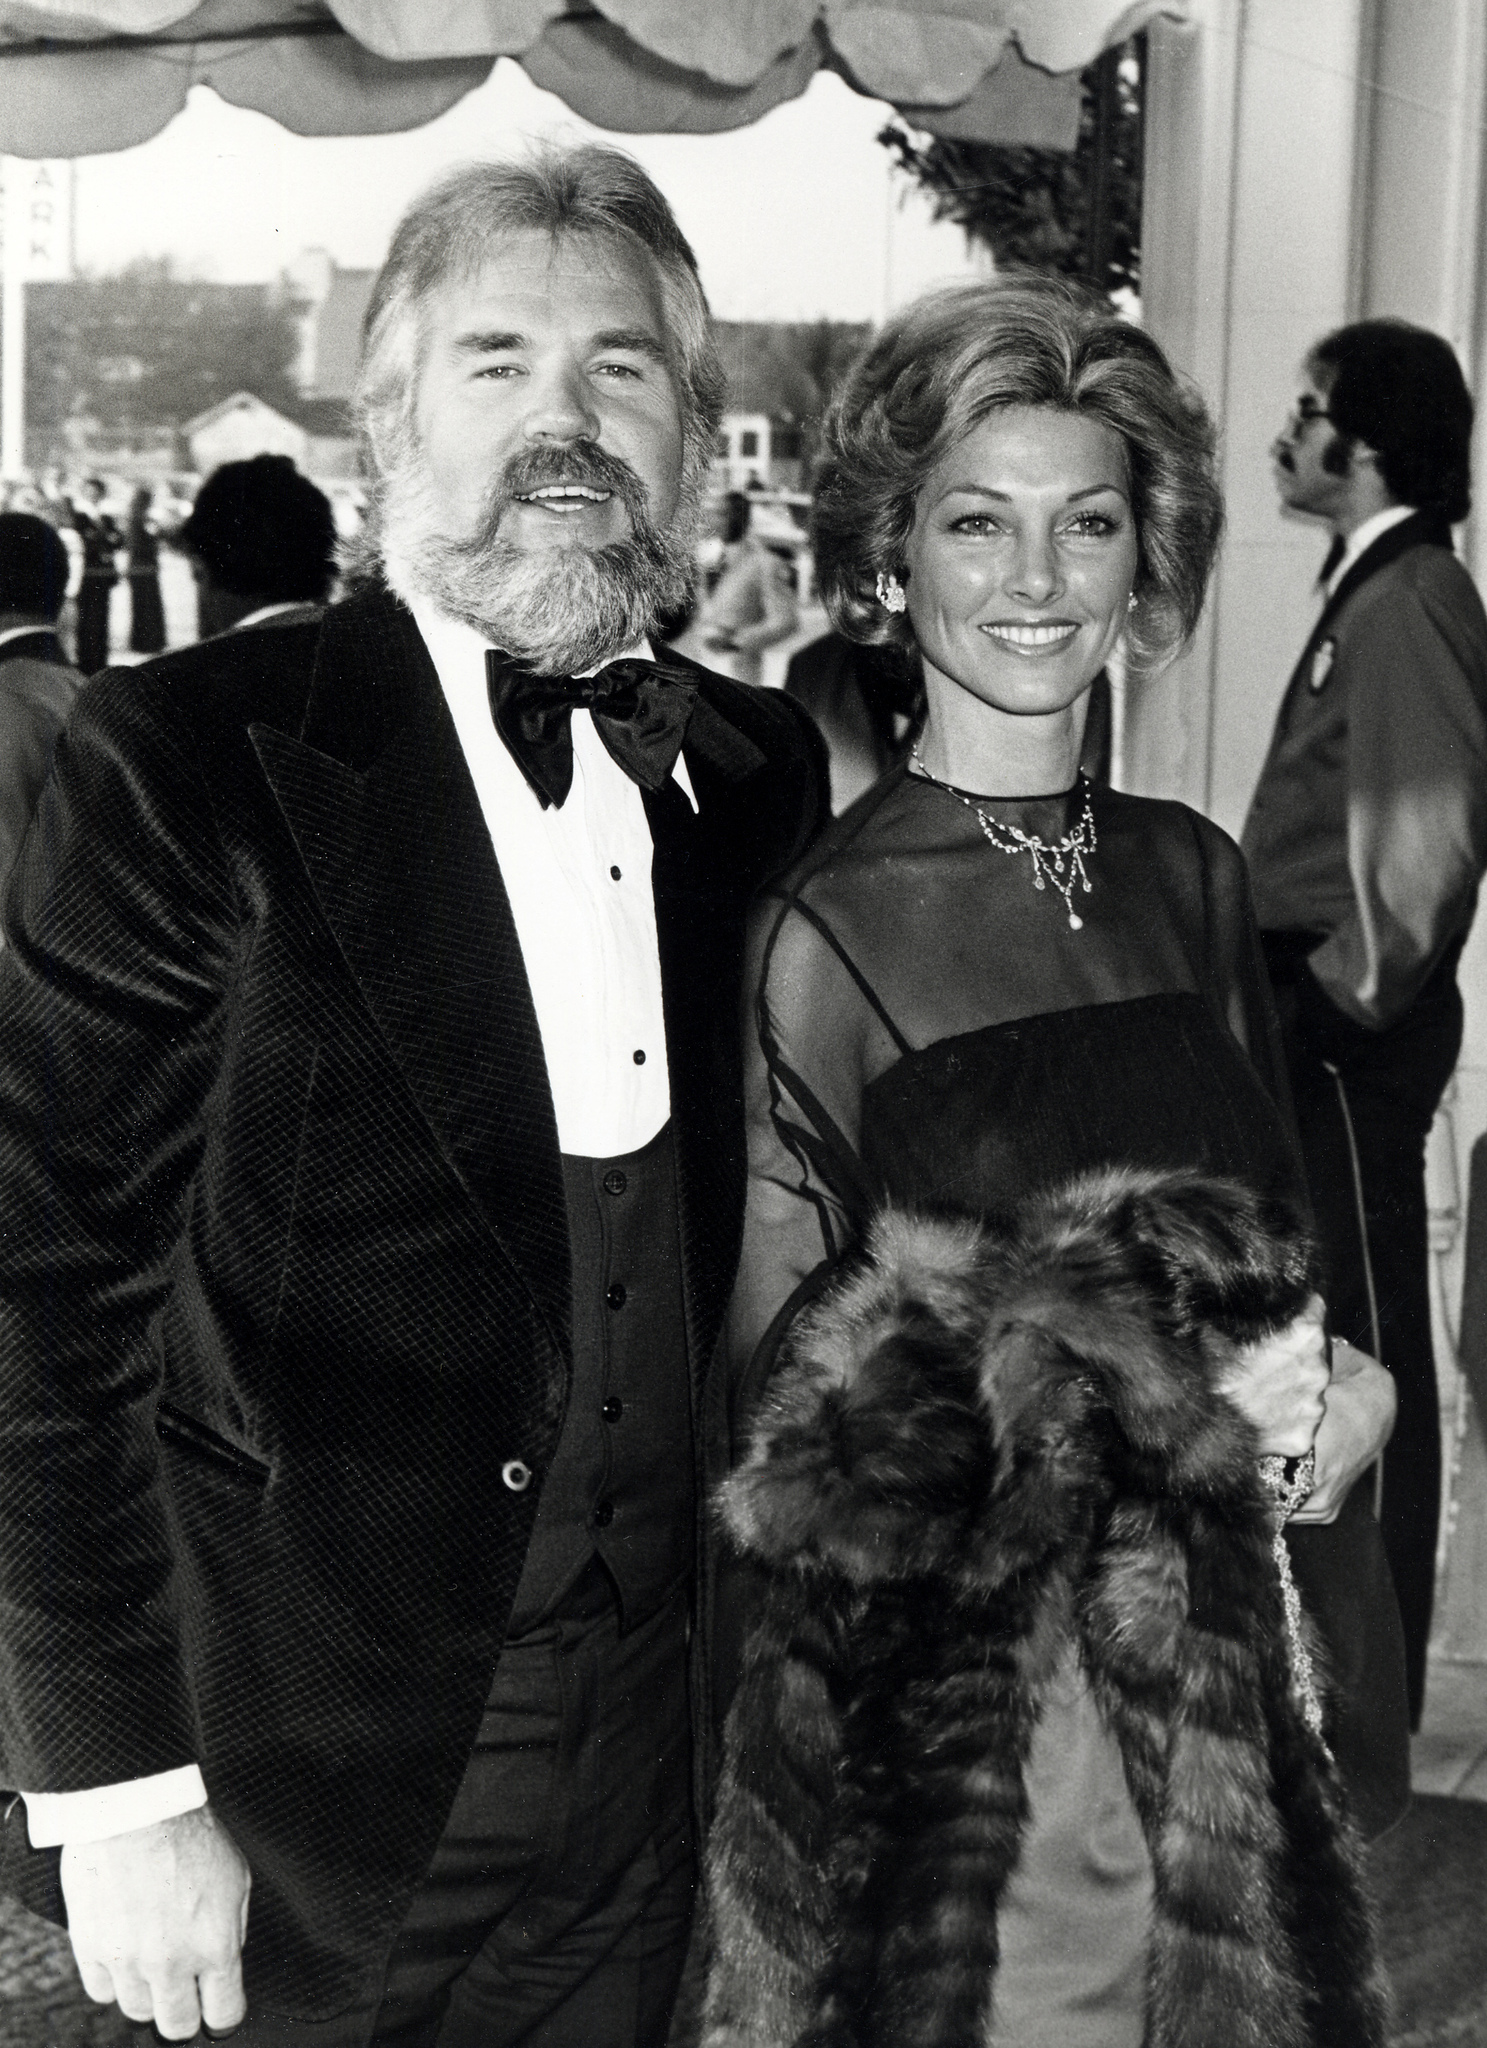 Marianne Gordon and Kenny Rogers